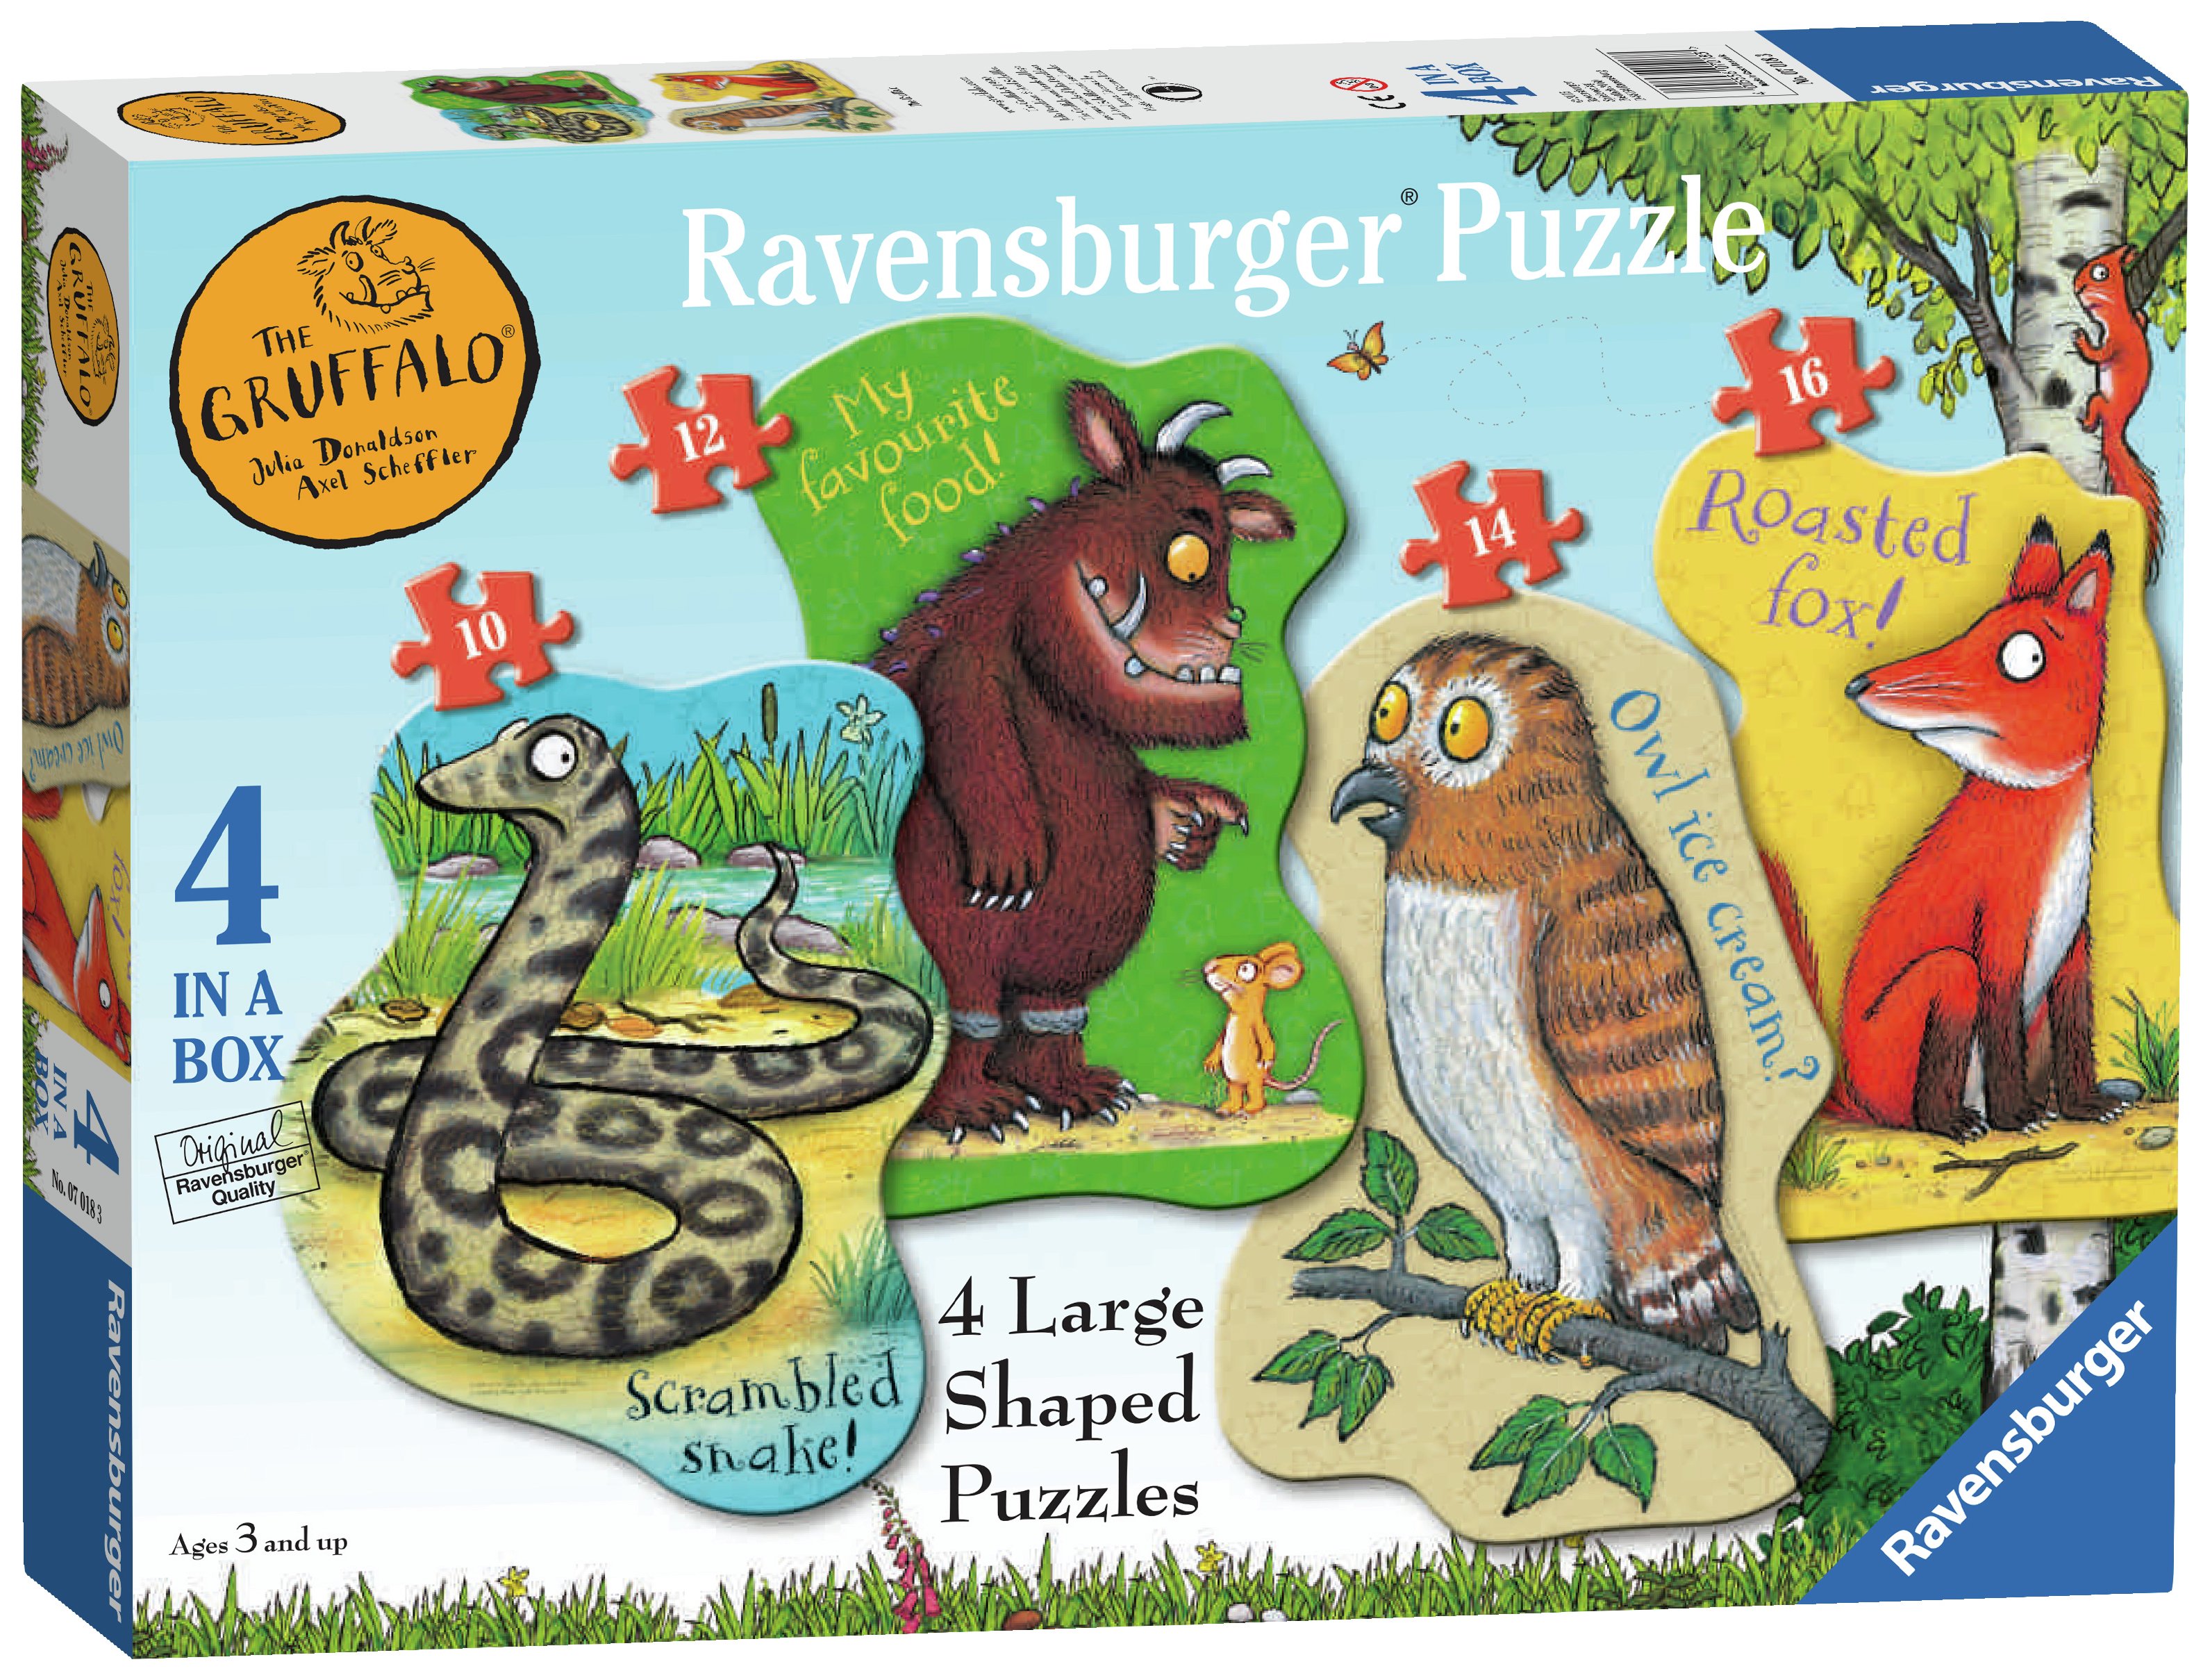 4 Games BNIB Ravensburger The Gruffalo Card Games for Kids Age 3 Years and Up